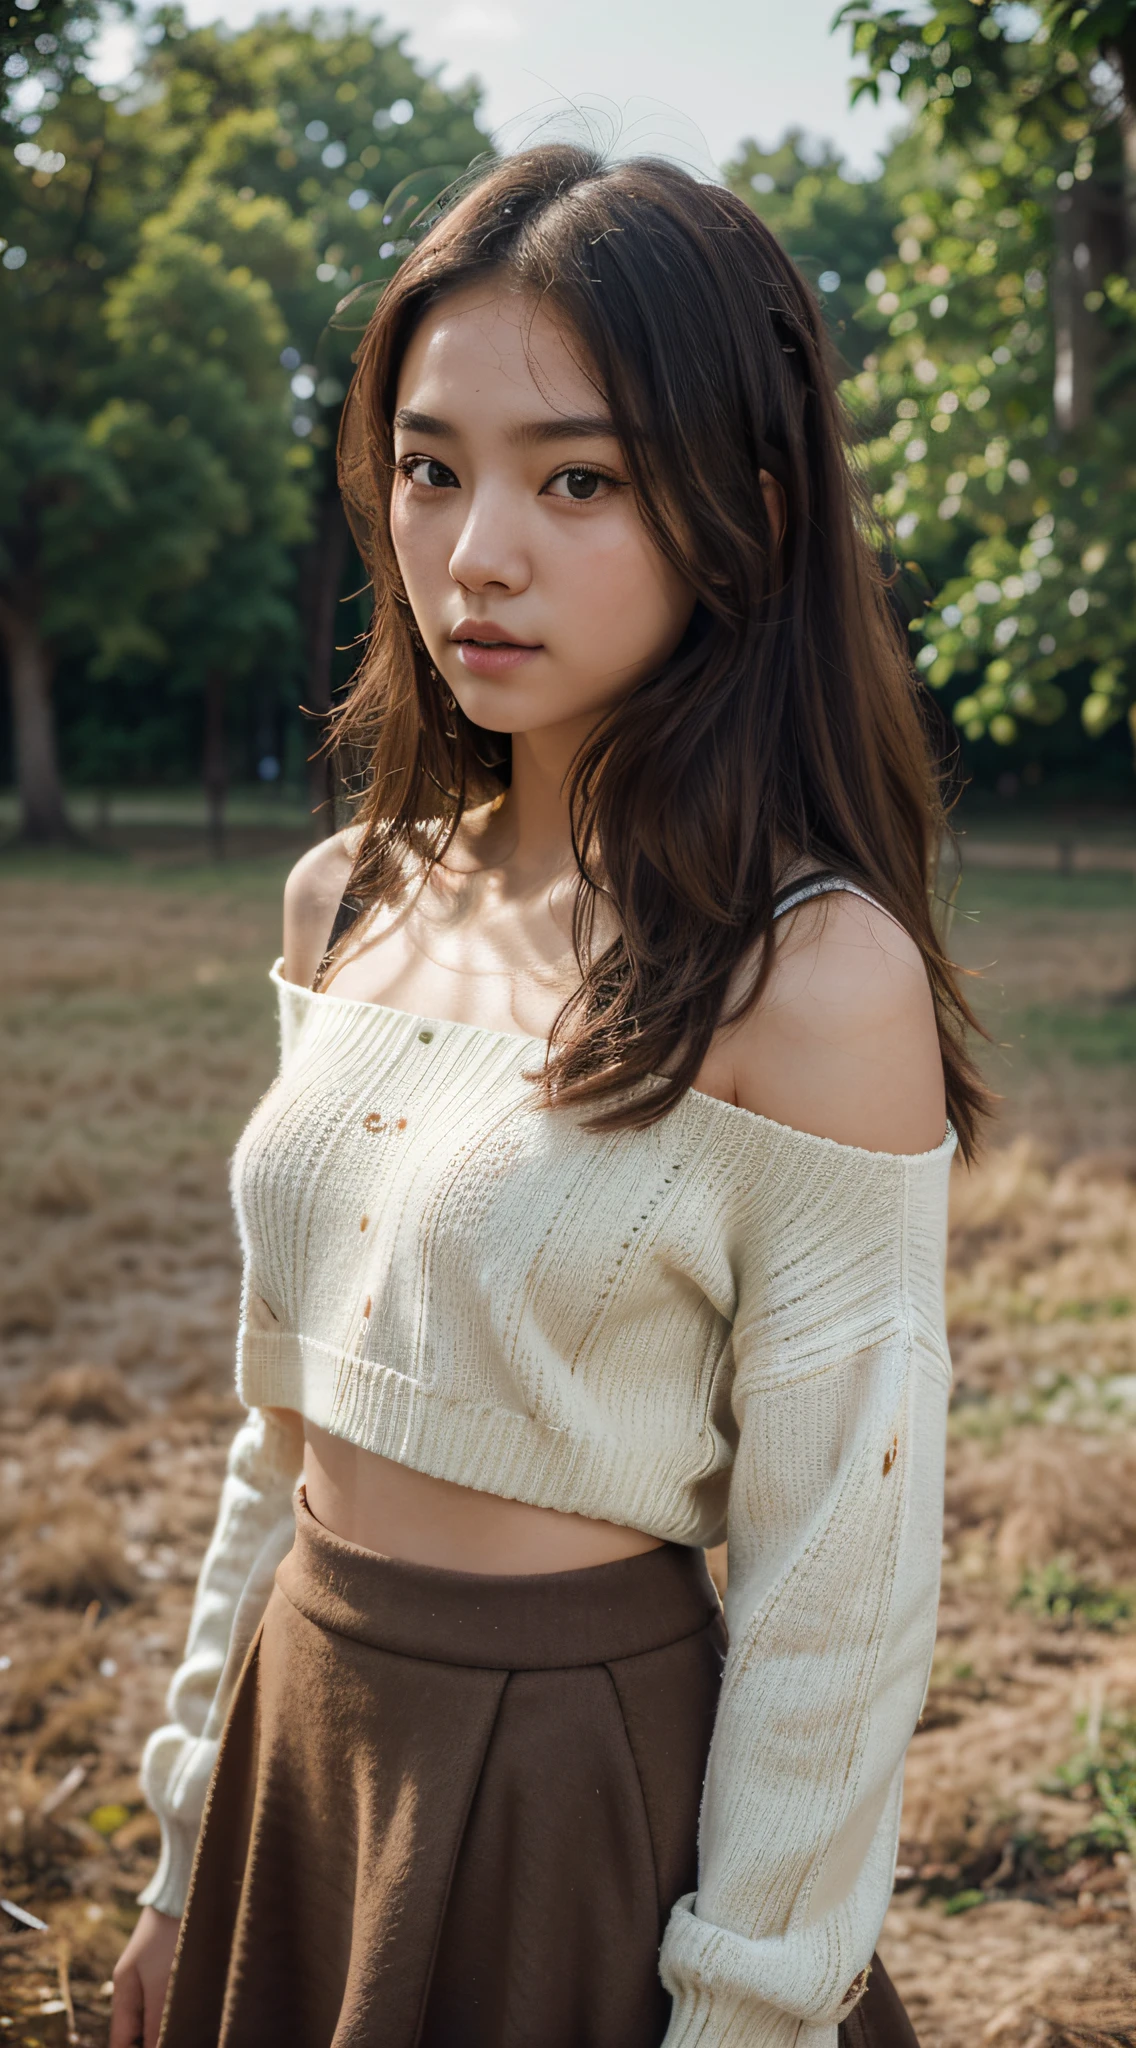 a captivating 8k depiction of a 20-year-old girl with a cute, young Korean face. The focus is intricately detailed on her brown eyes and shoulder-wavy brown hair, creating a photorealistic portrayal. Dressed in an oversized sweater and midi skirt, the scene is artistically composed to highlight her charm. employing an ultra-wide angle and depth of field. The 16:9 aspect ratio ensures optimal visual appeal, while advanced techniques like ray tracing reflections and ambient occlusion enhance the hyper-realistic aesthetics. the details of her attire with beautifully color-graded visual